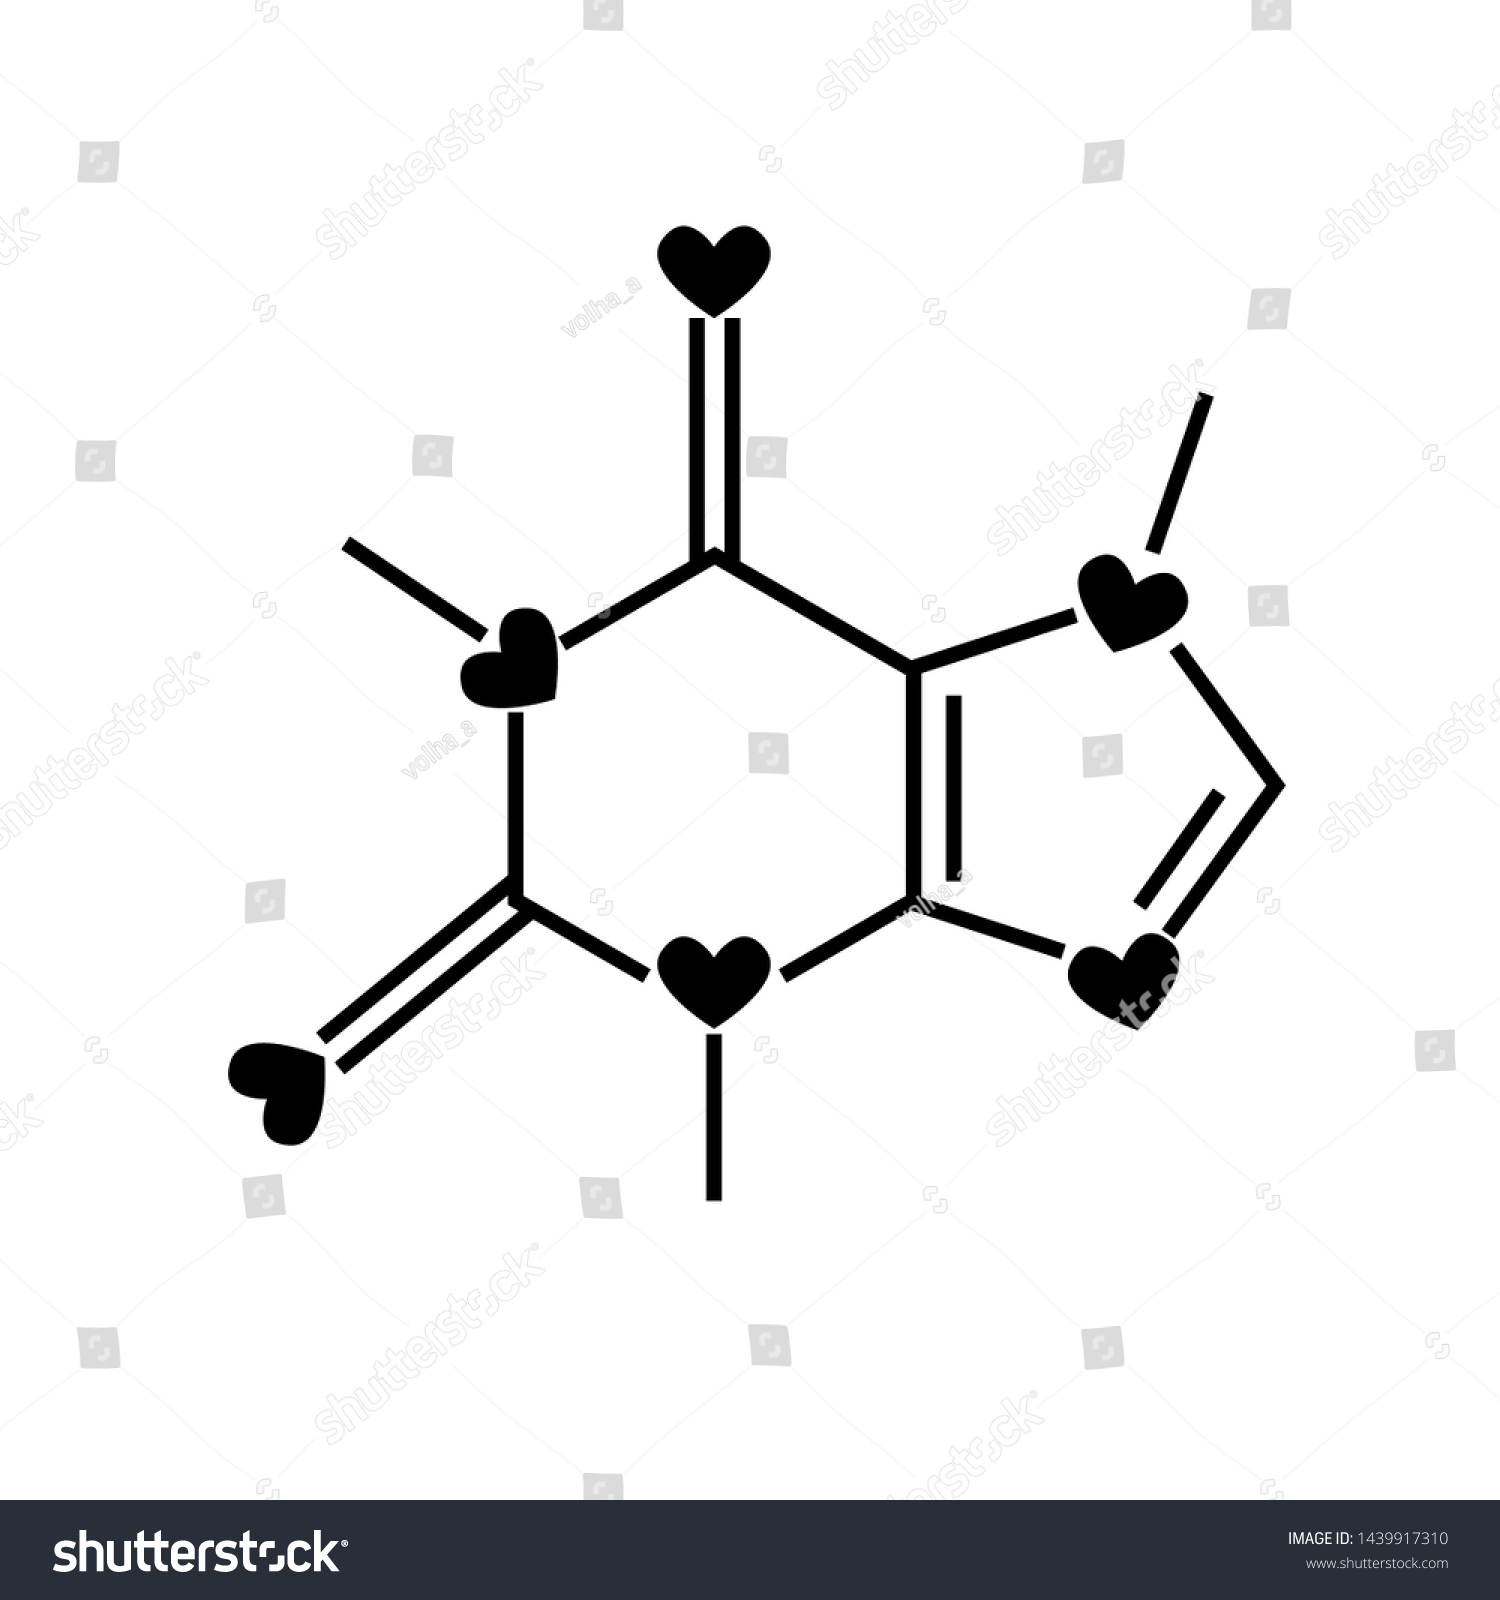 SVG of Caffeine chemical formula with hearts. Vector illustration on white. svg